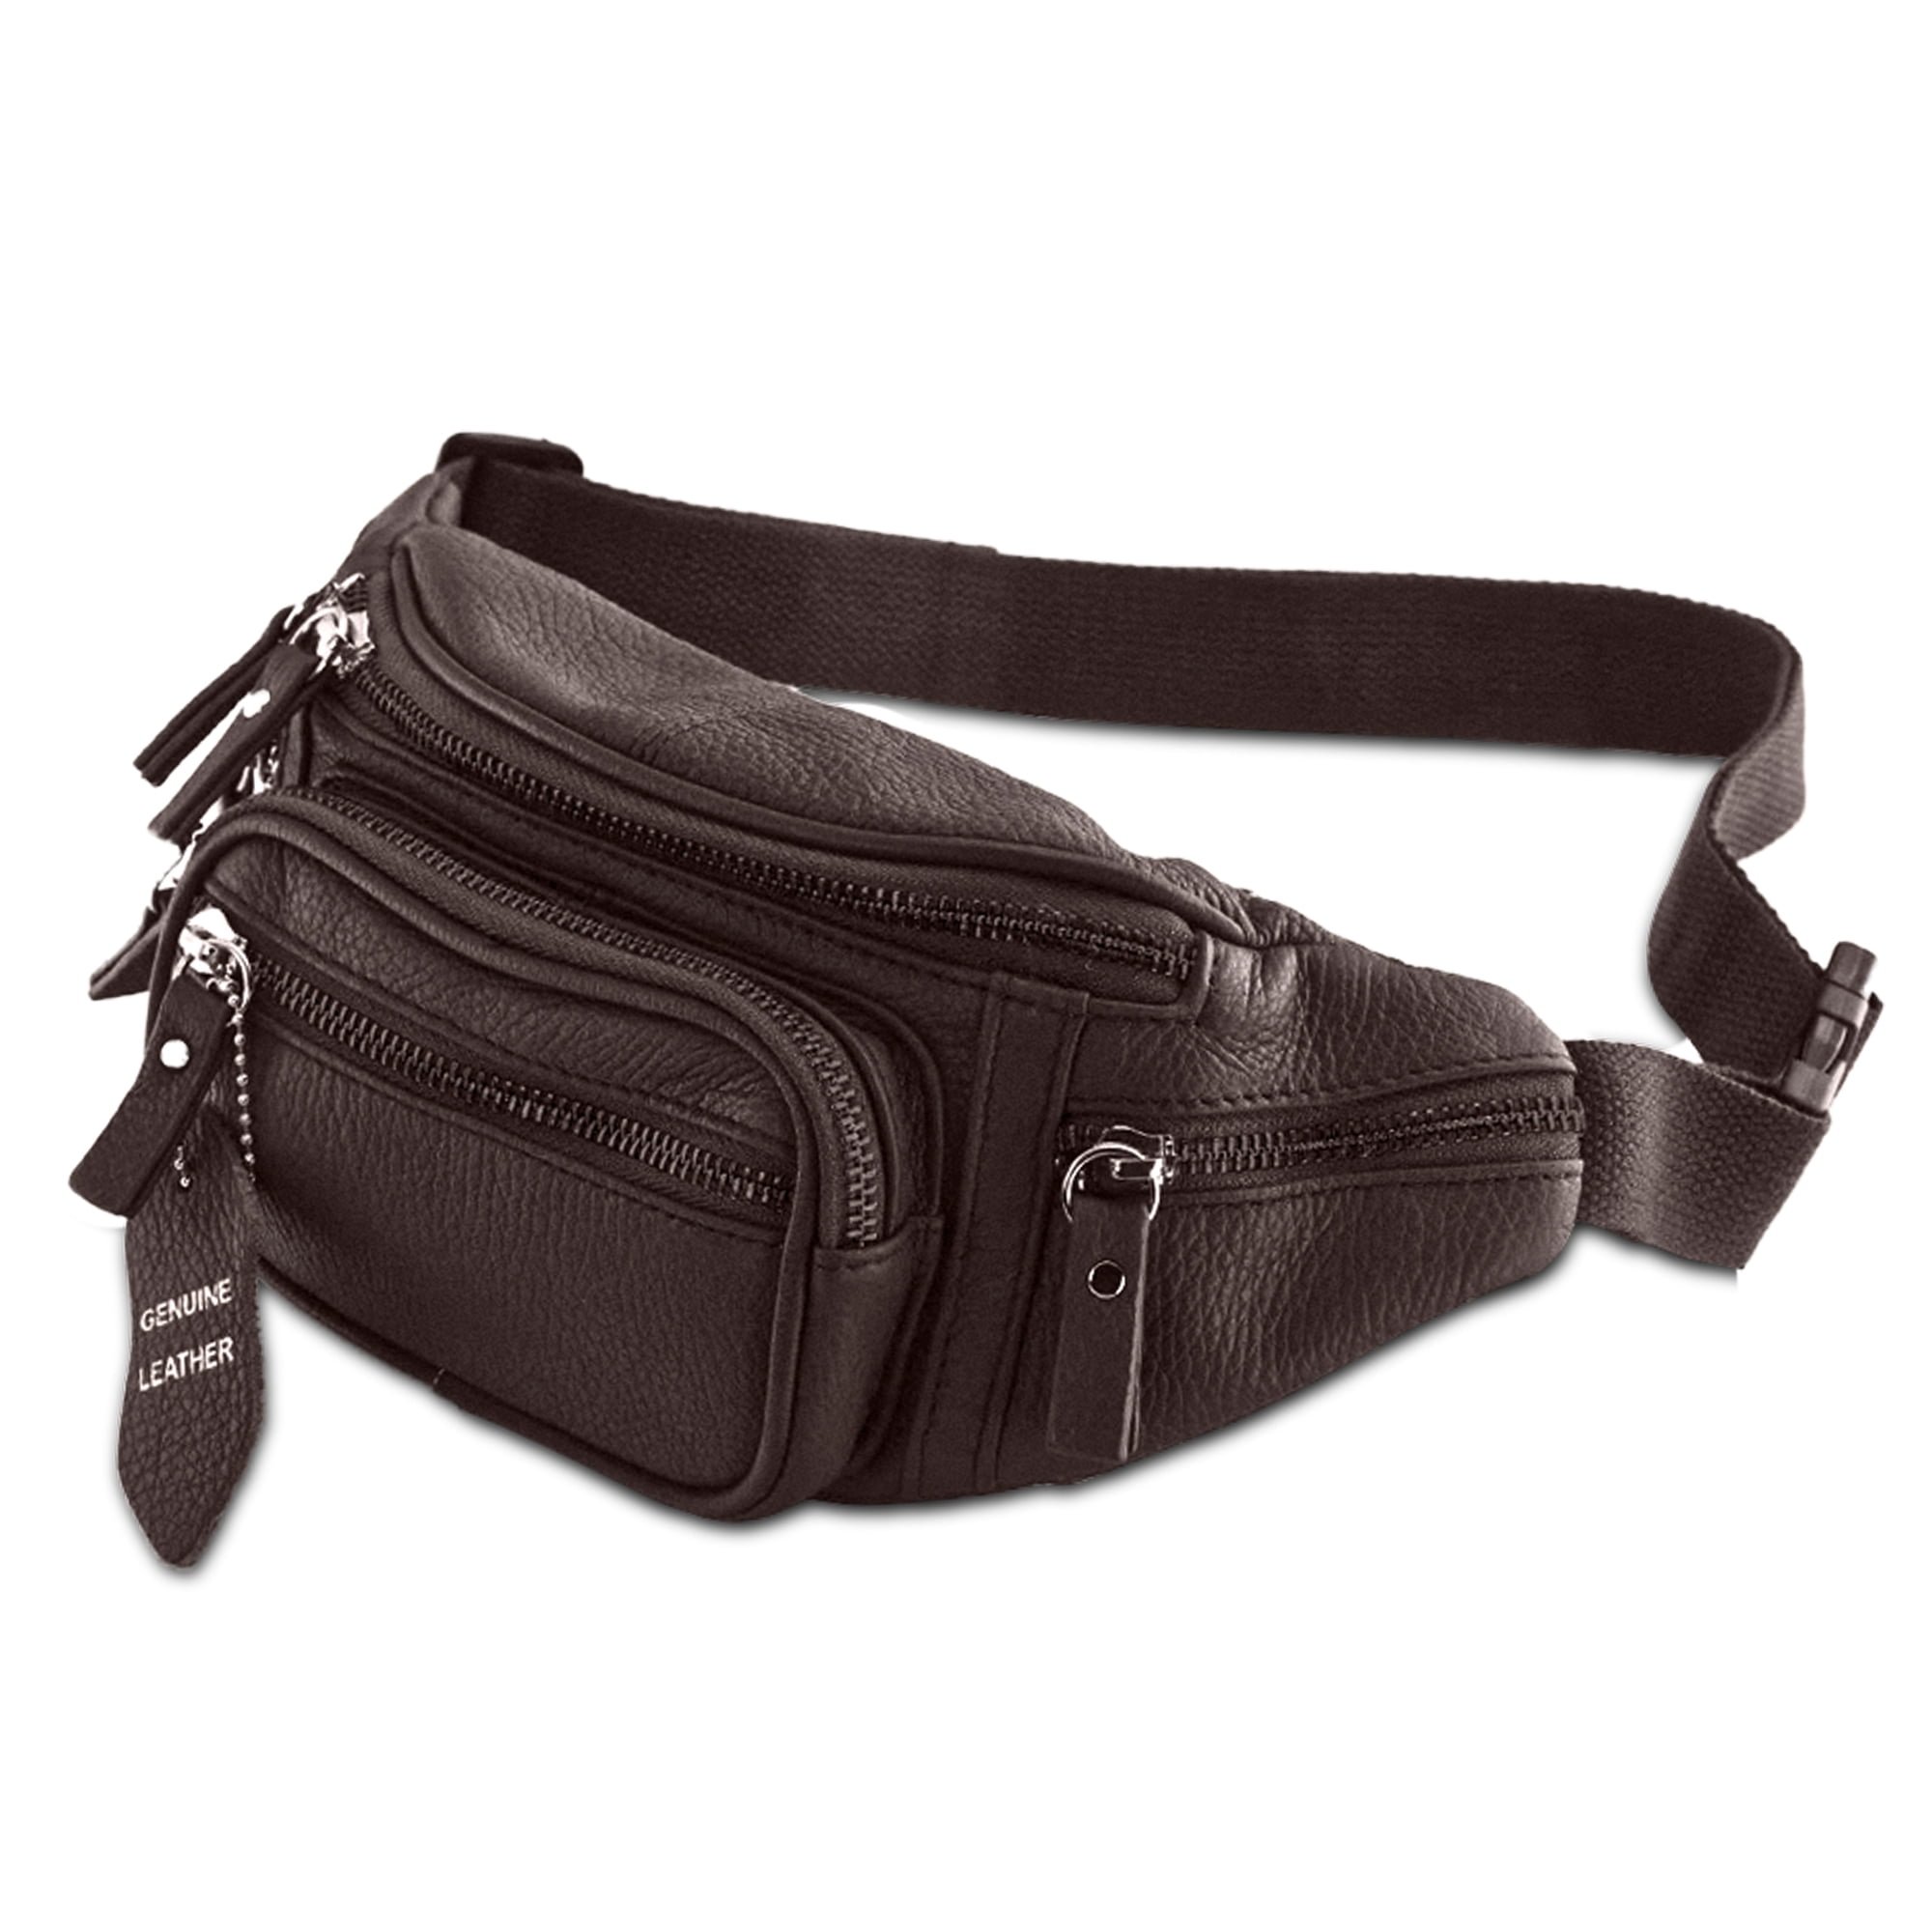 BRAND NEW 8" BLACK LEATHER FANNY PACK ~ HIKING WALKING HUNTING FISHING CAMPING 